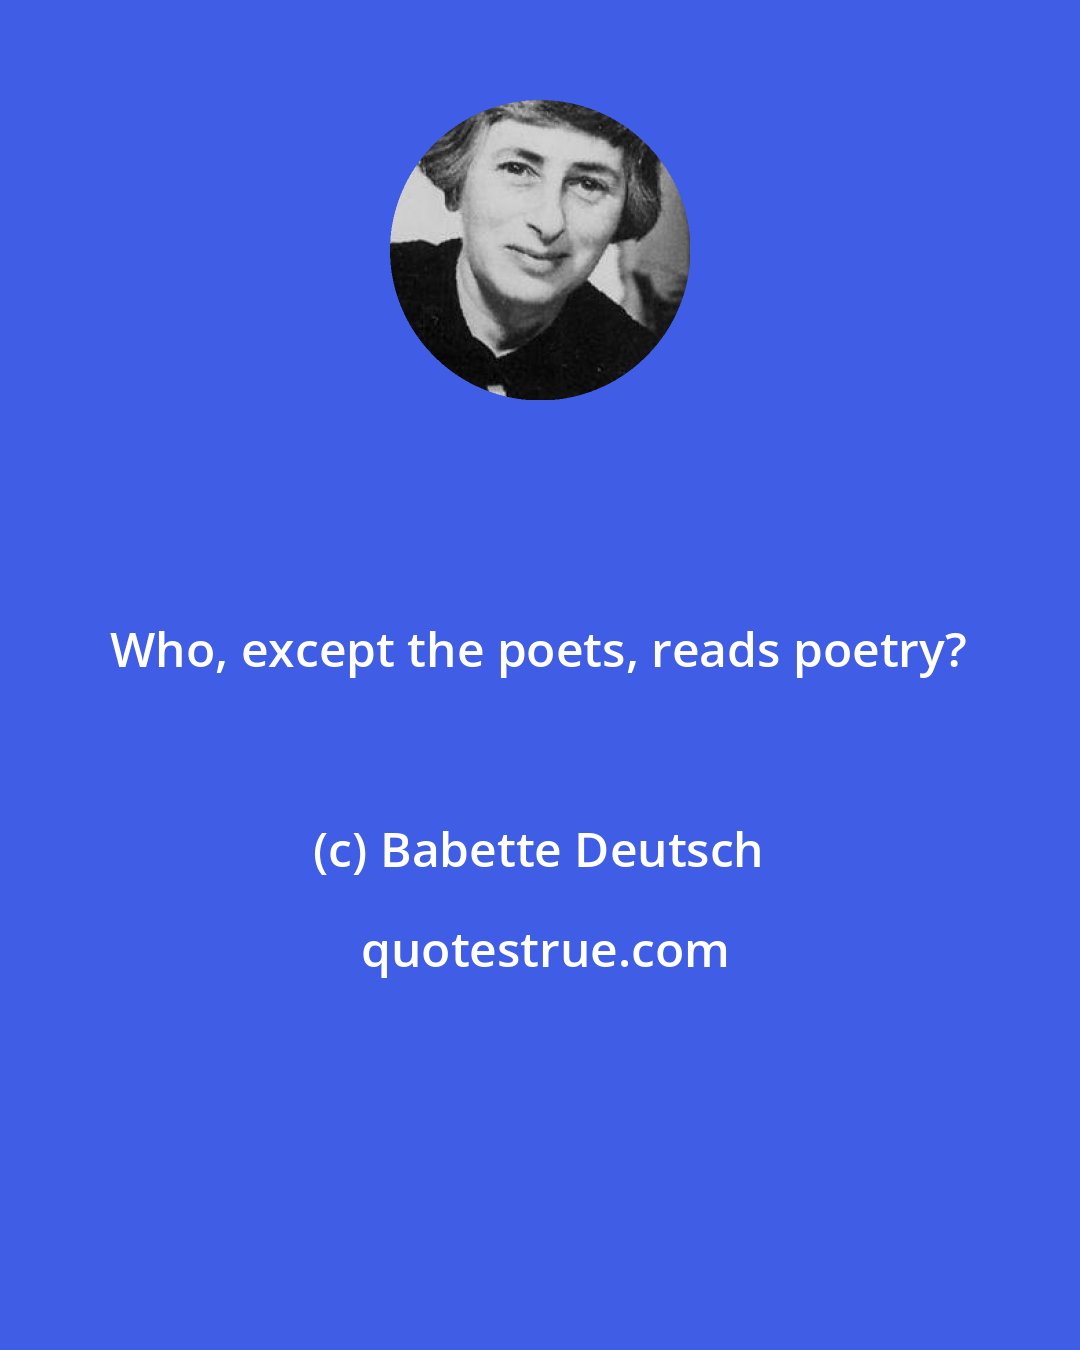 Babette Deutsch: Who, except the poets, reads poetry?